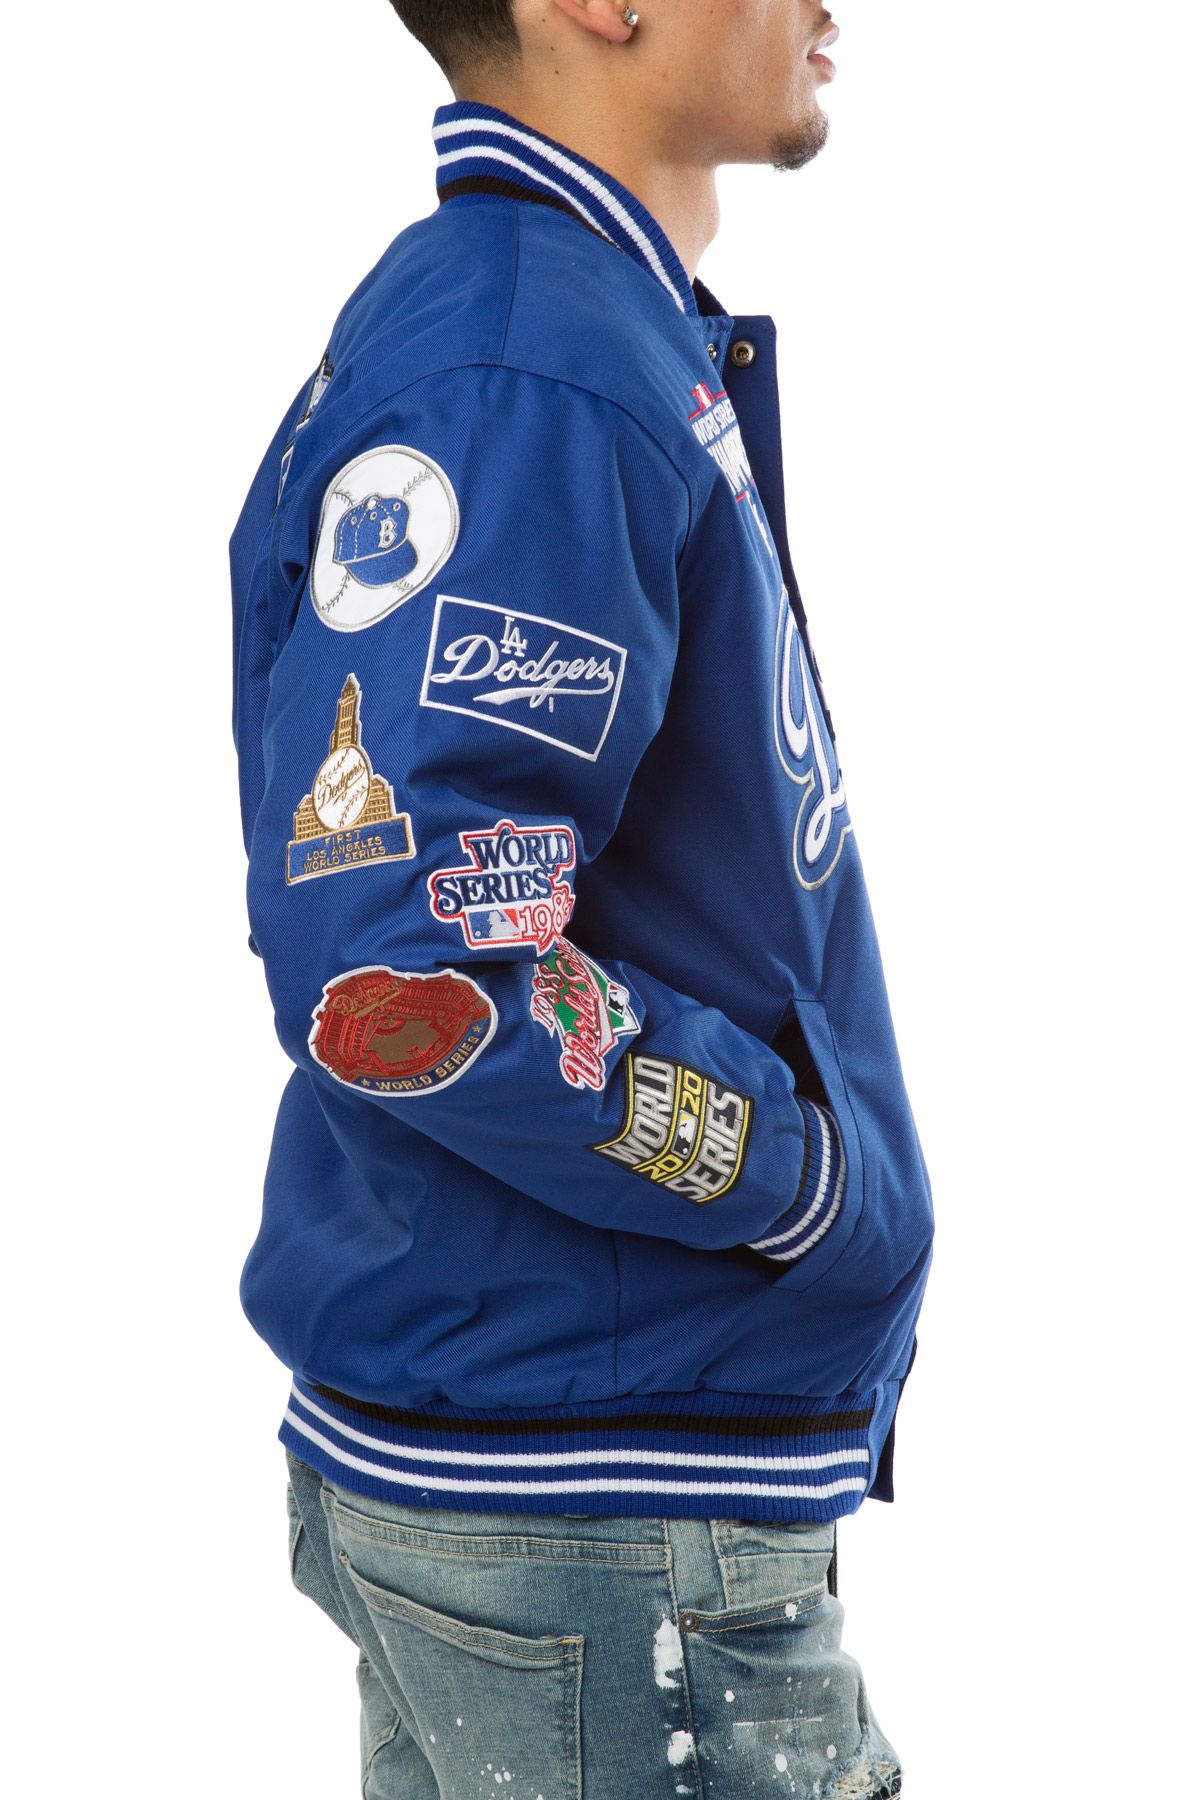 LOS ANGELES DODGERS 2020 WORLD SERIES CHAMPIONS JACKET DODP03WS20COL